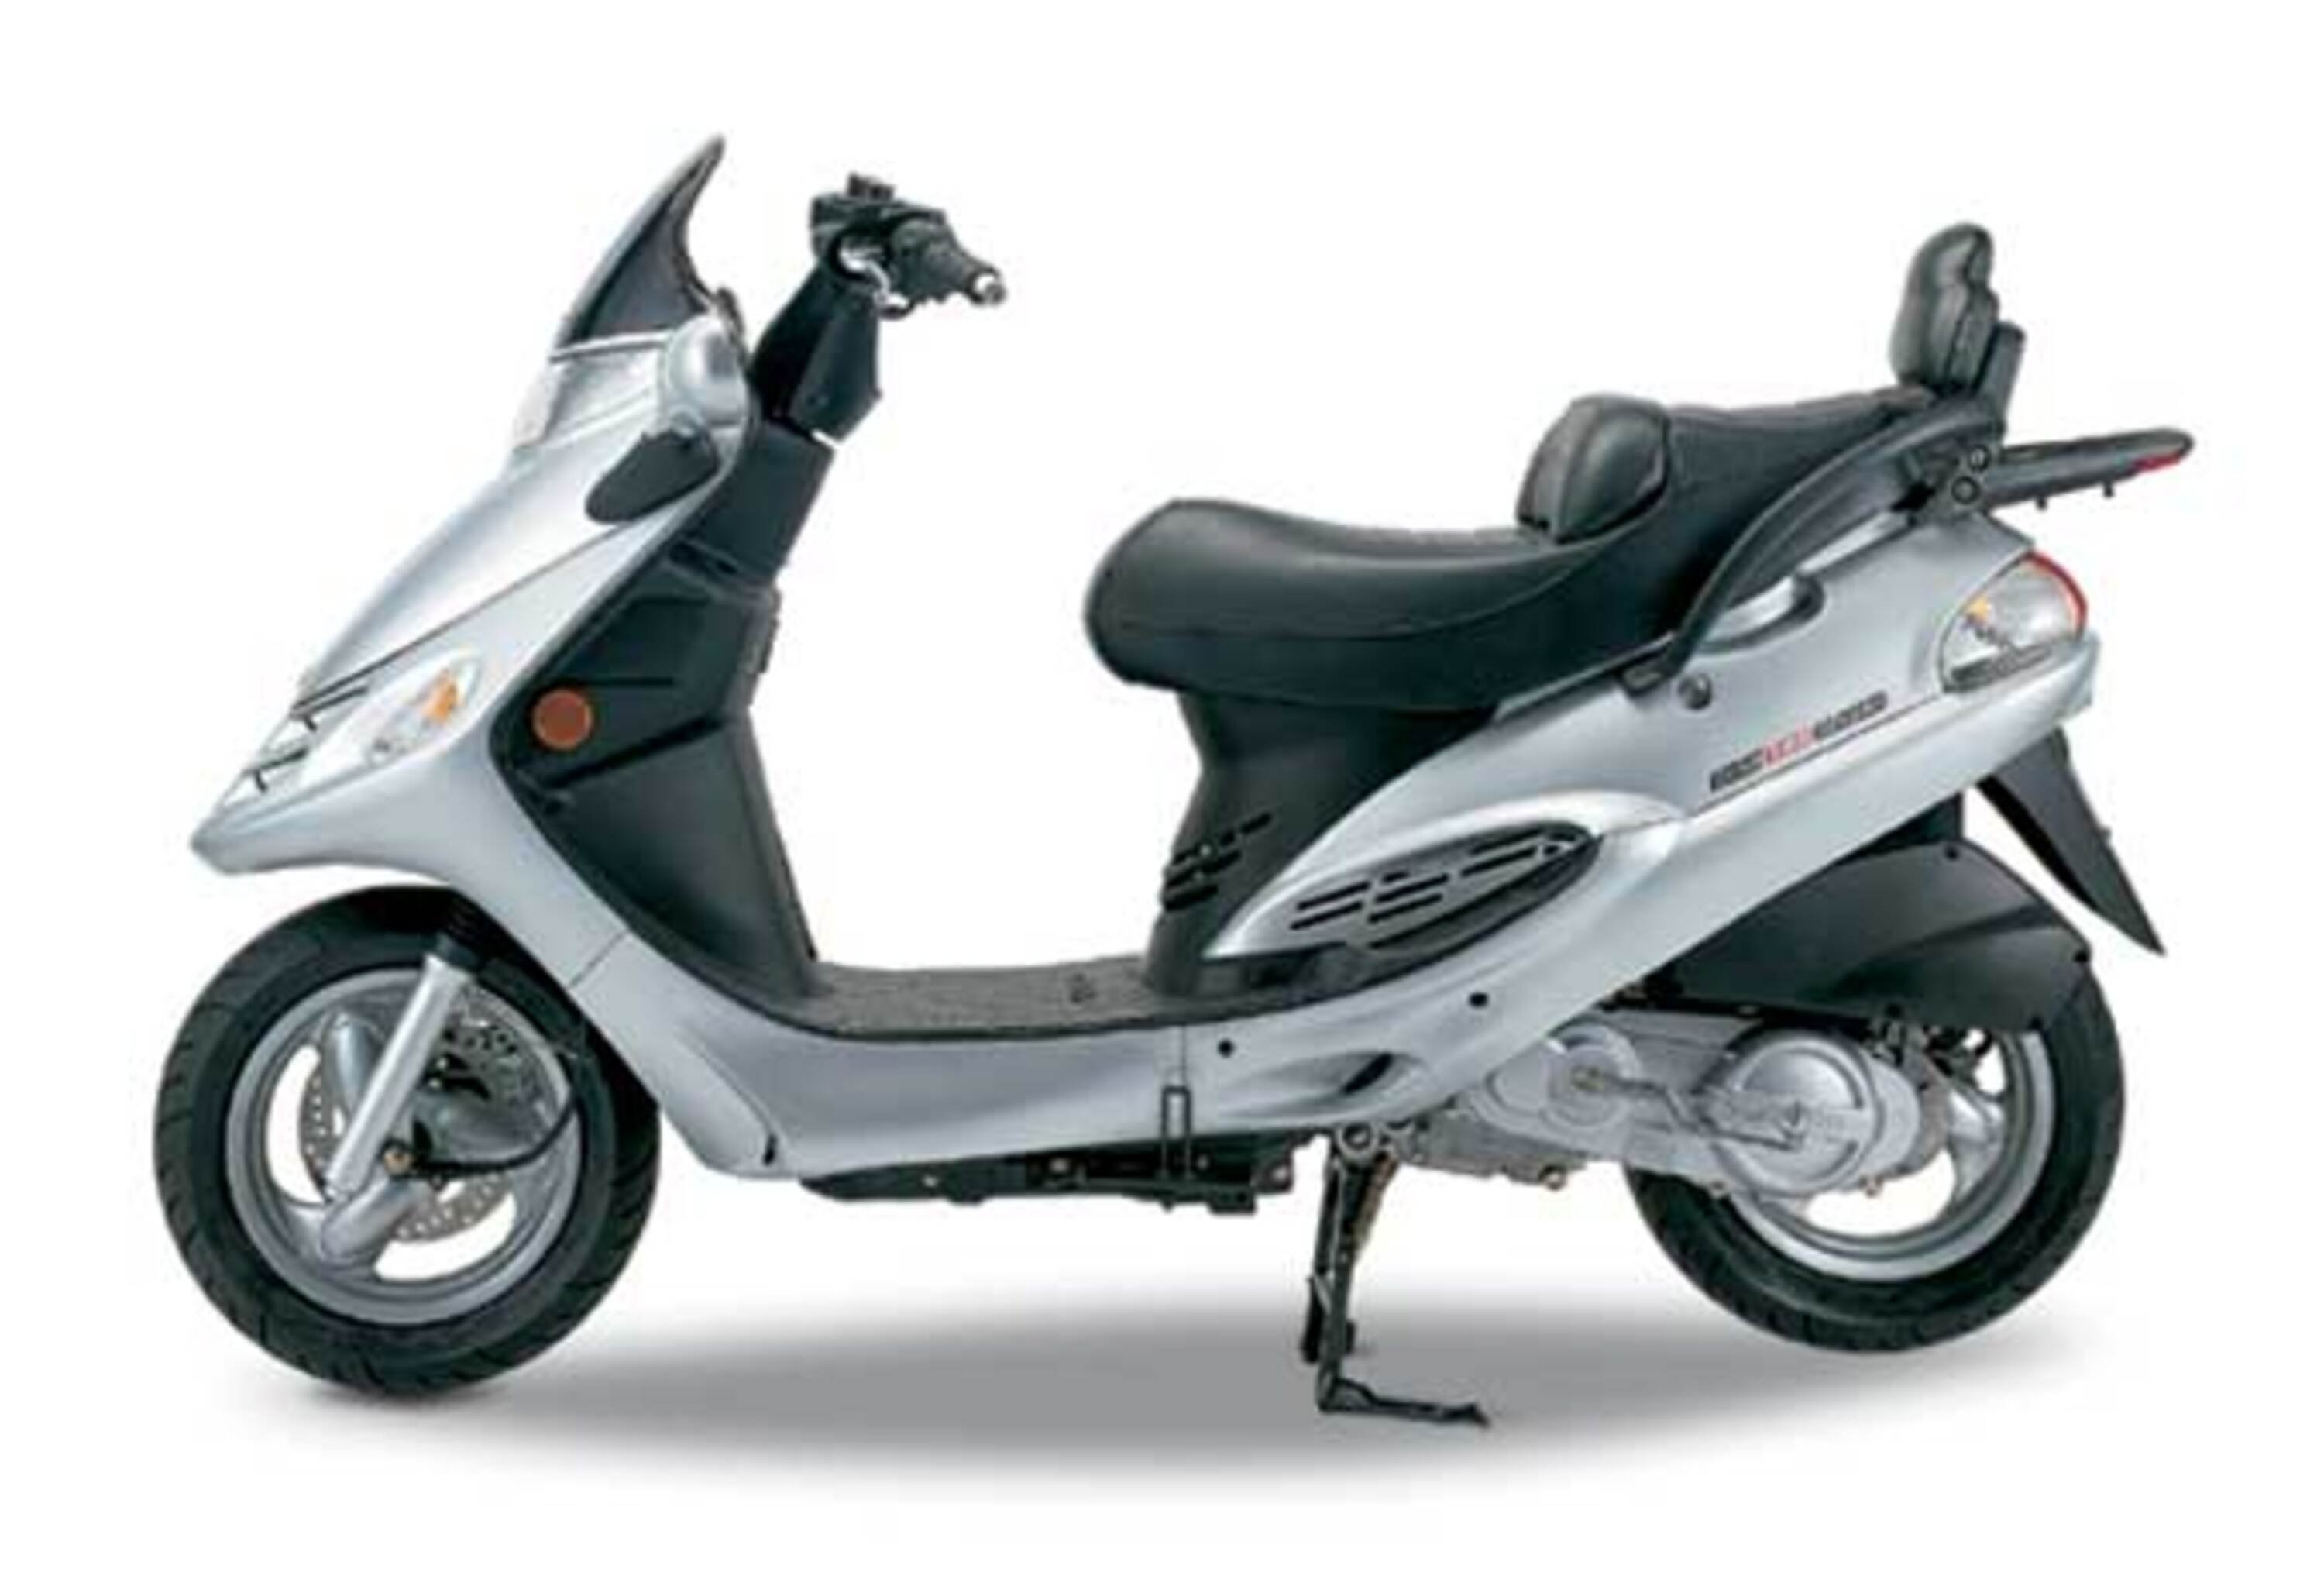 Kymco Dink 125 Dink 125 Classic (1997 - 06)